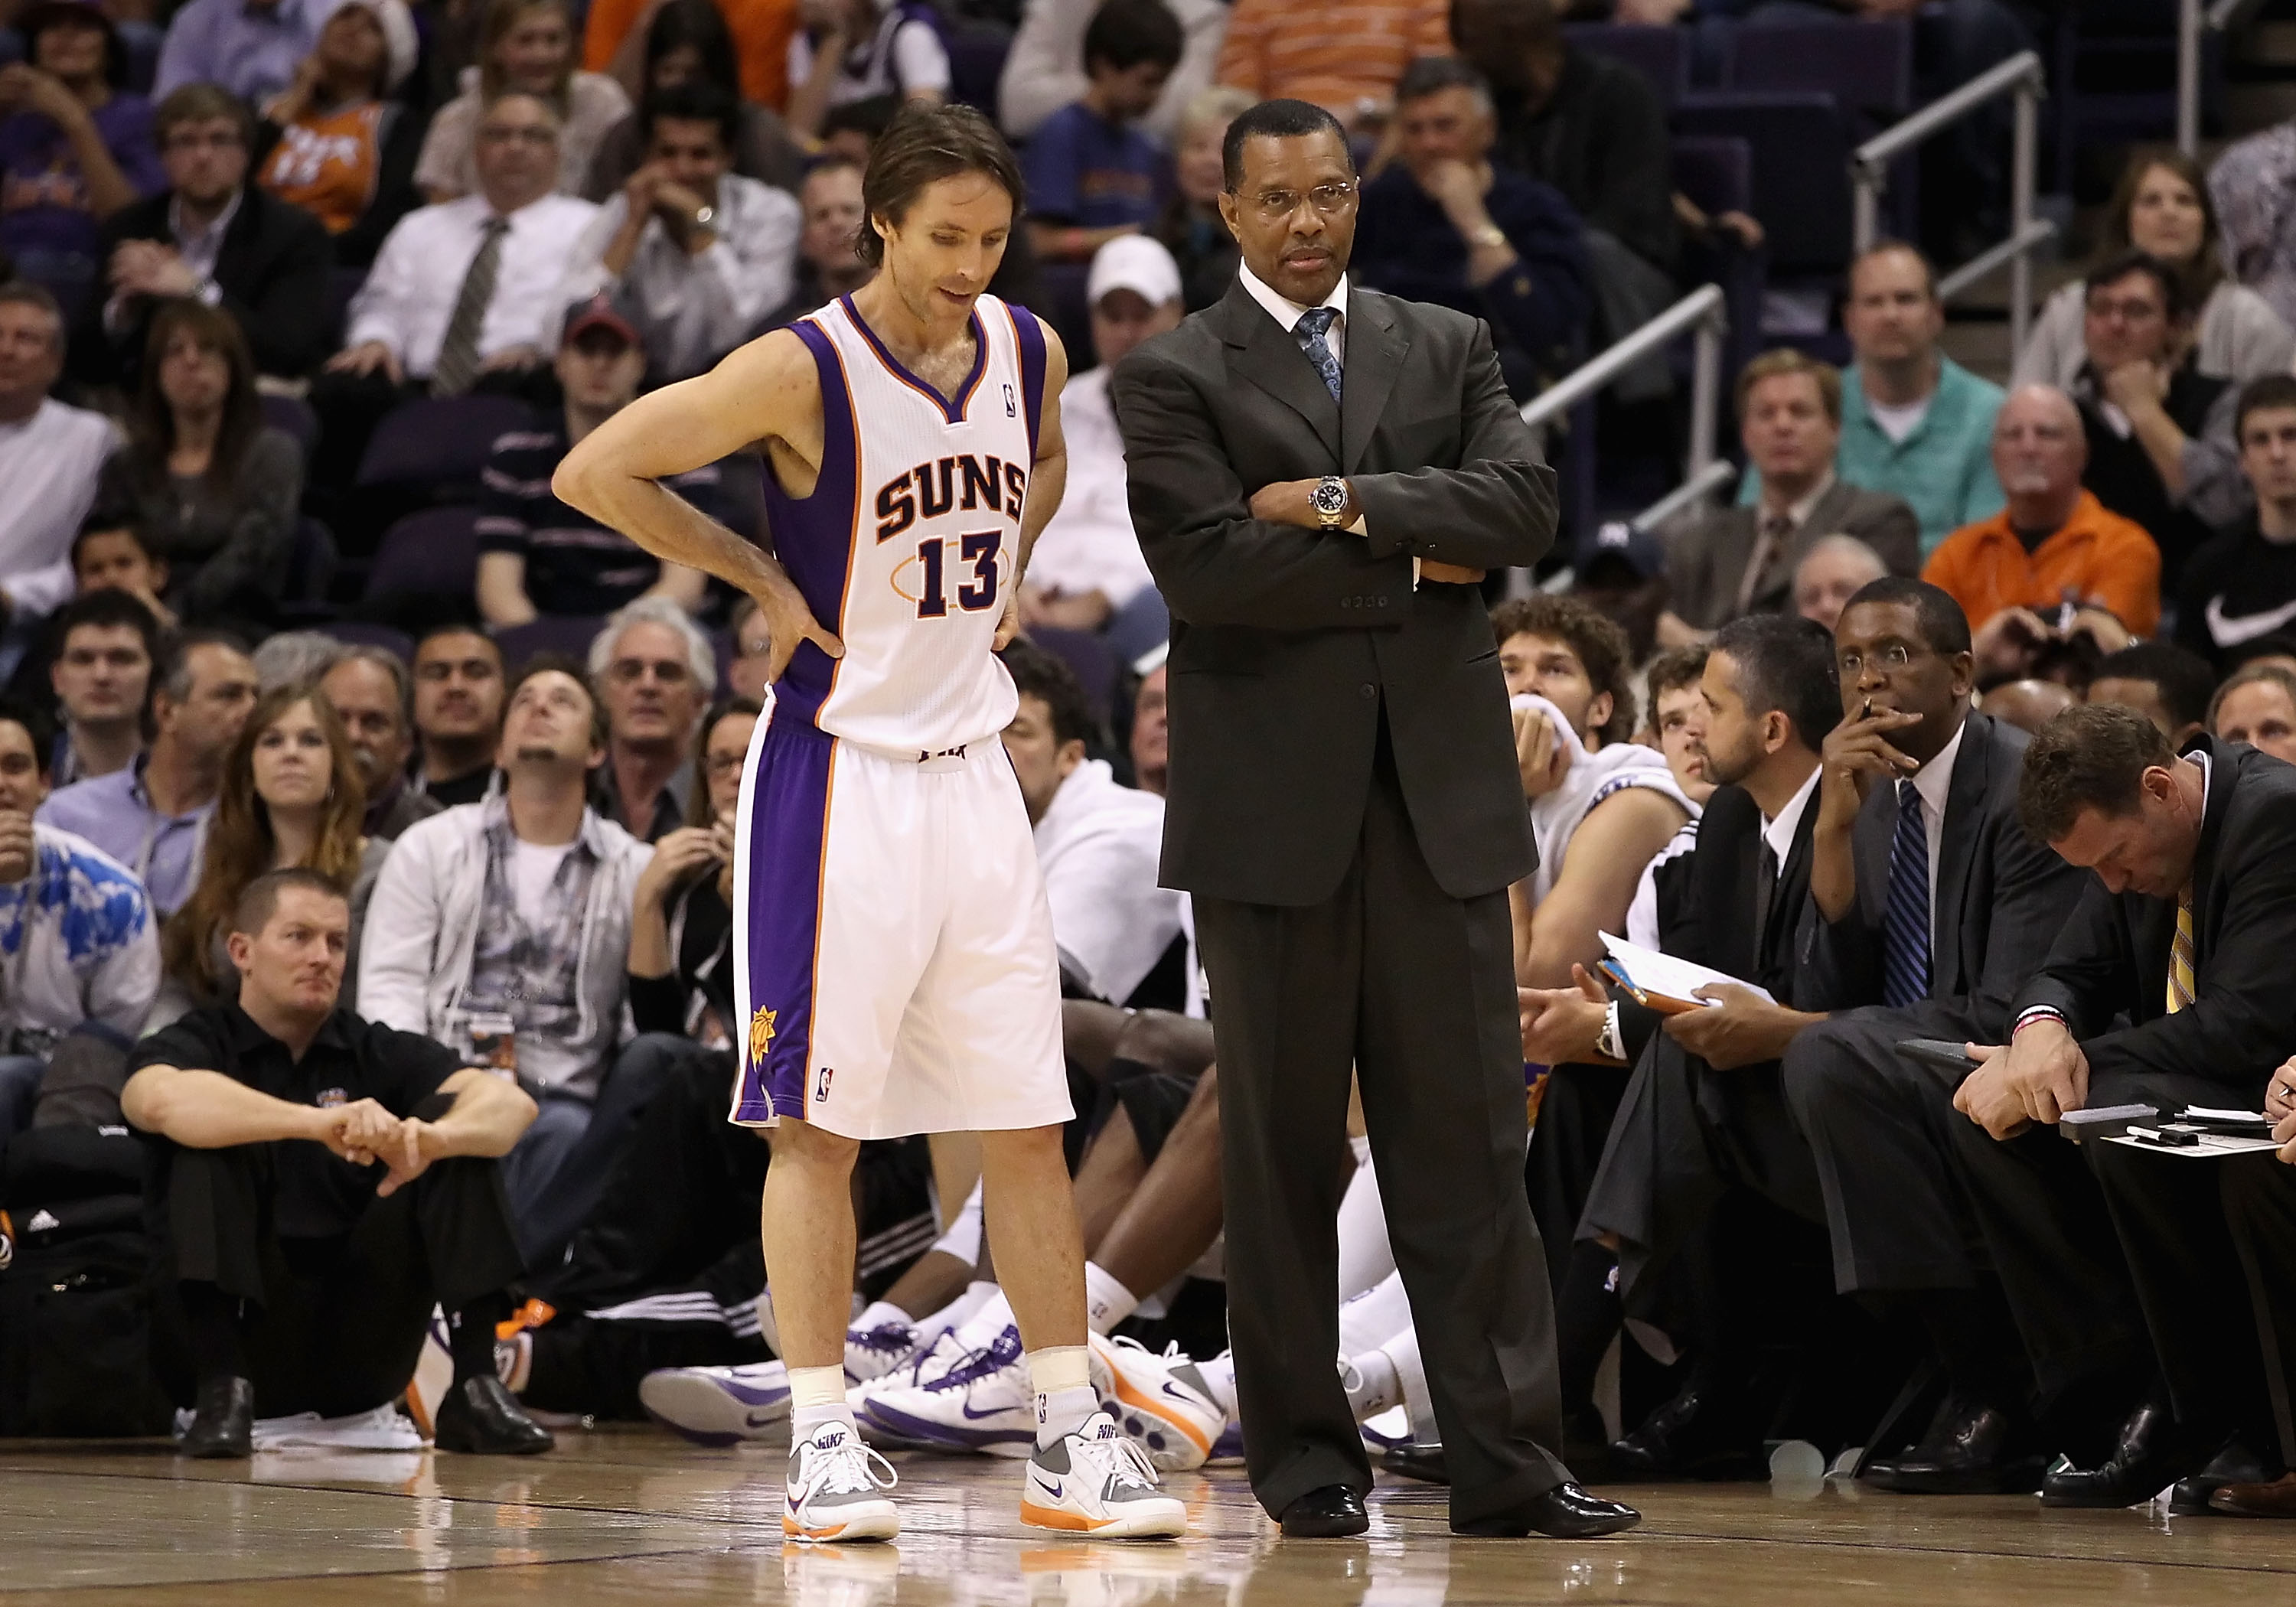 PHOENIX - DECEMBER 15:  Steve Nash #13 and head coach Alvin Gentry of the Phoenix Suns during the NBA game against the Minnesota Timberwolves at US Airways Center on December 15, 2010 in Phoenix, Arizona. NOTE TO USER: User expressly acknowledges and agre